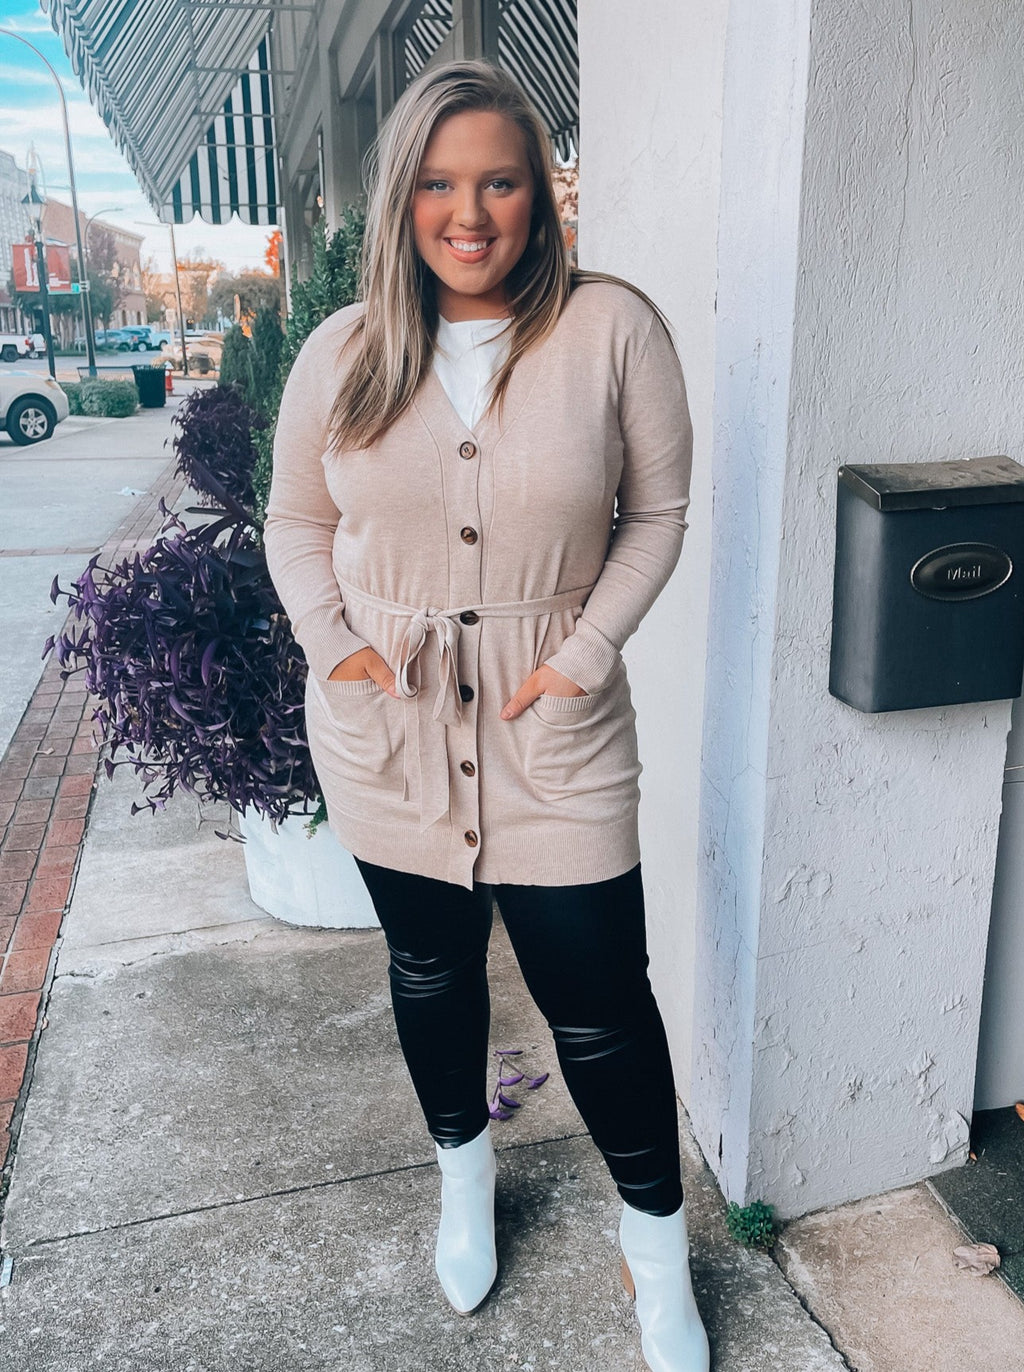 Cardigan features an open front detail, dreamy soft material, long sleeve detail, solid base color, waist tie detail, button down detail, functional pockets and runs true to size! 